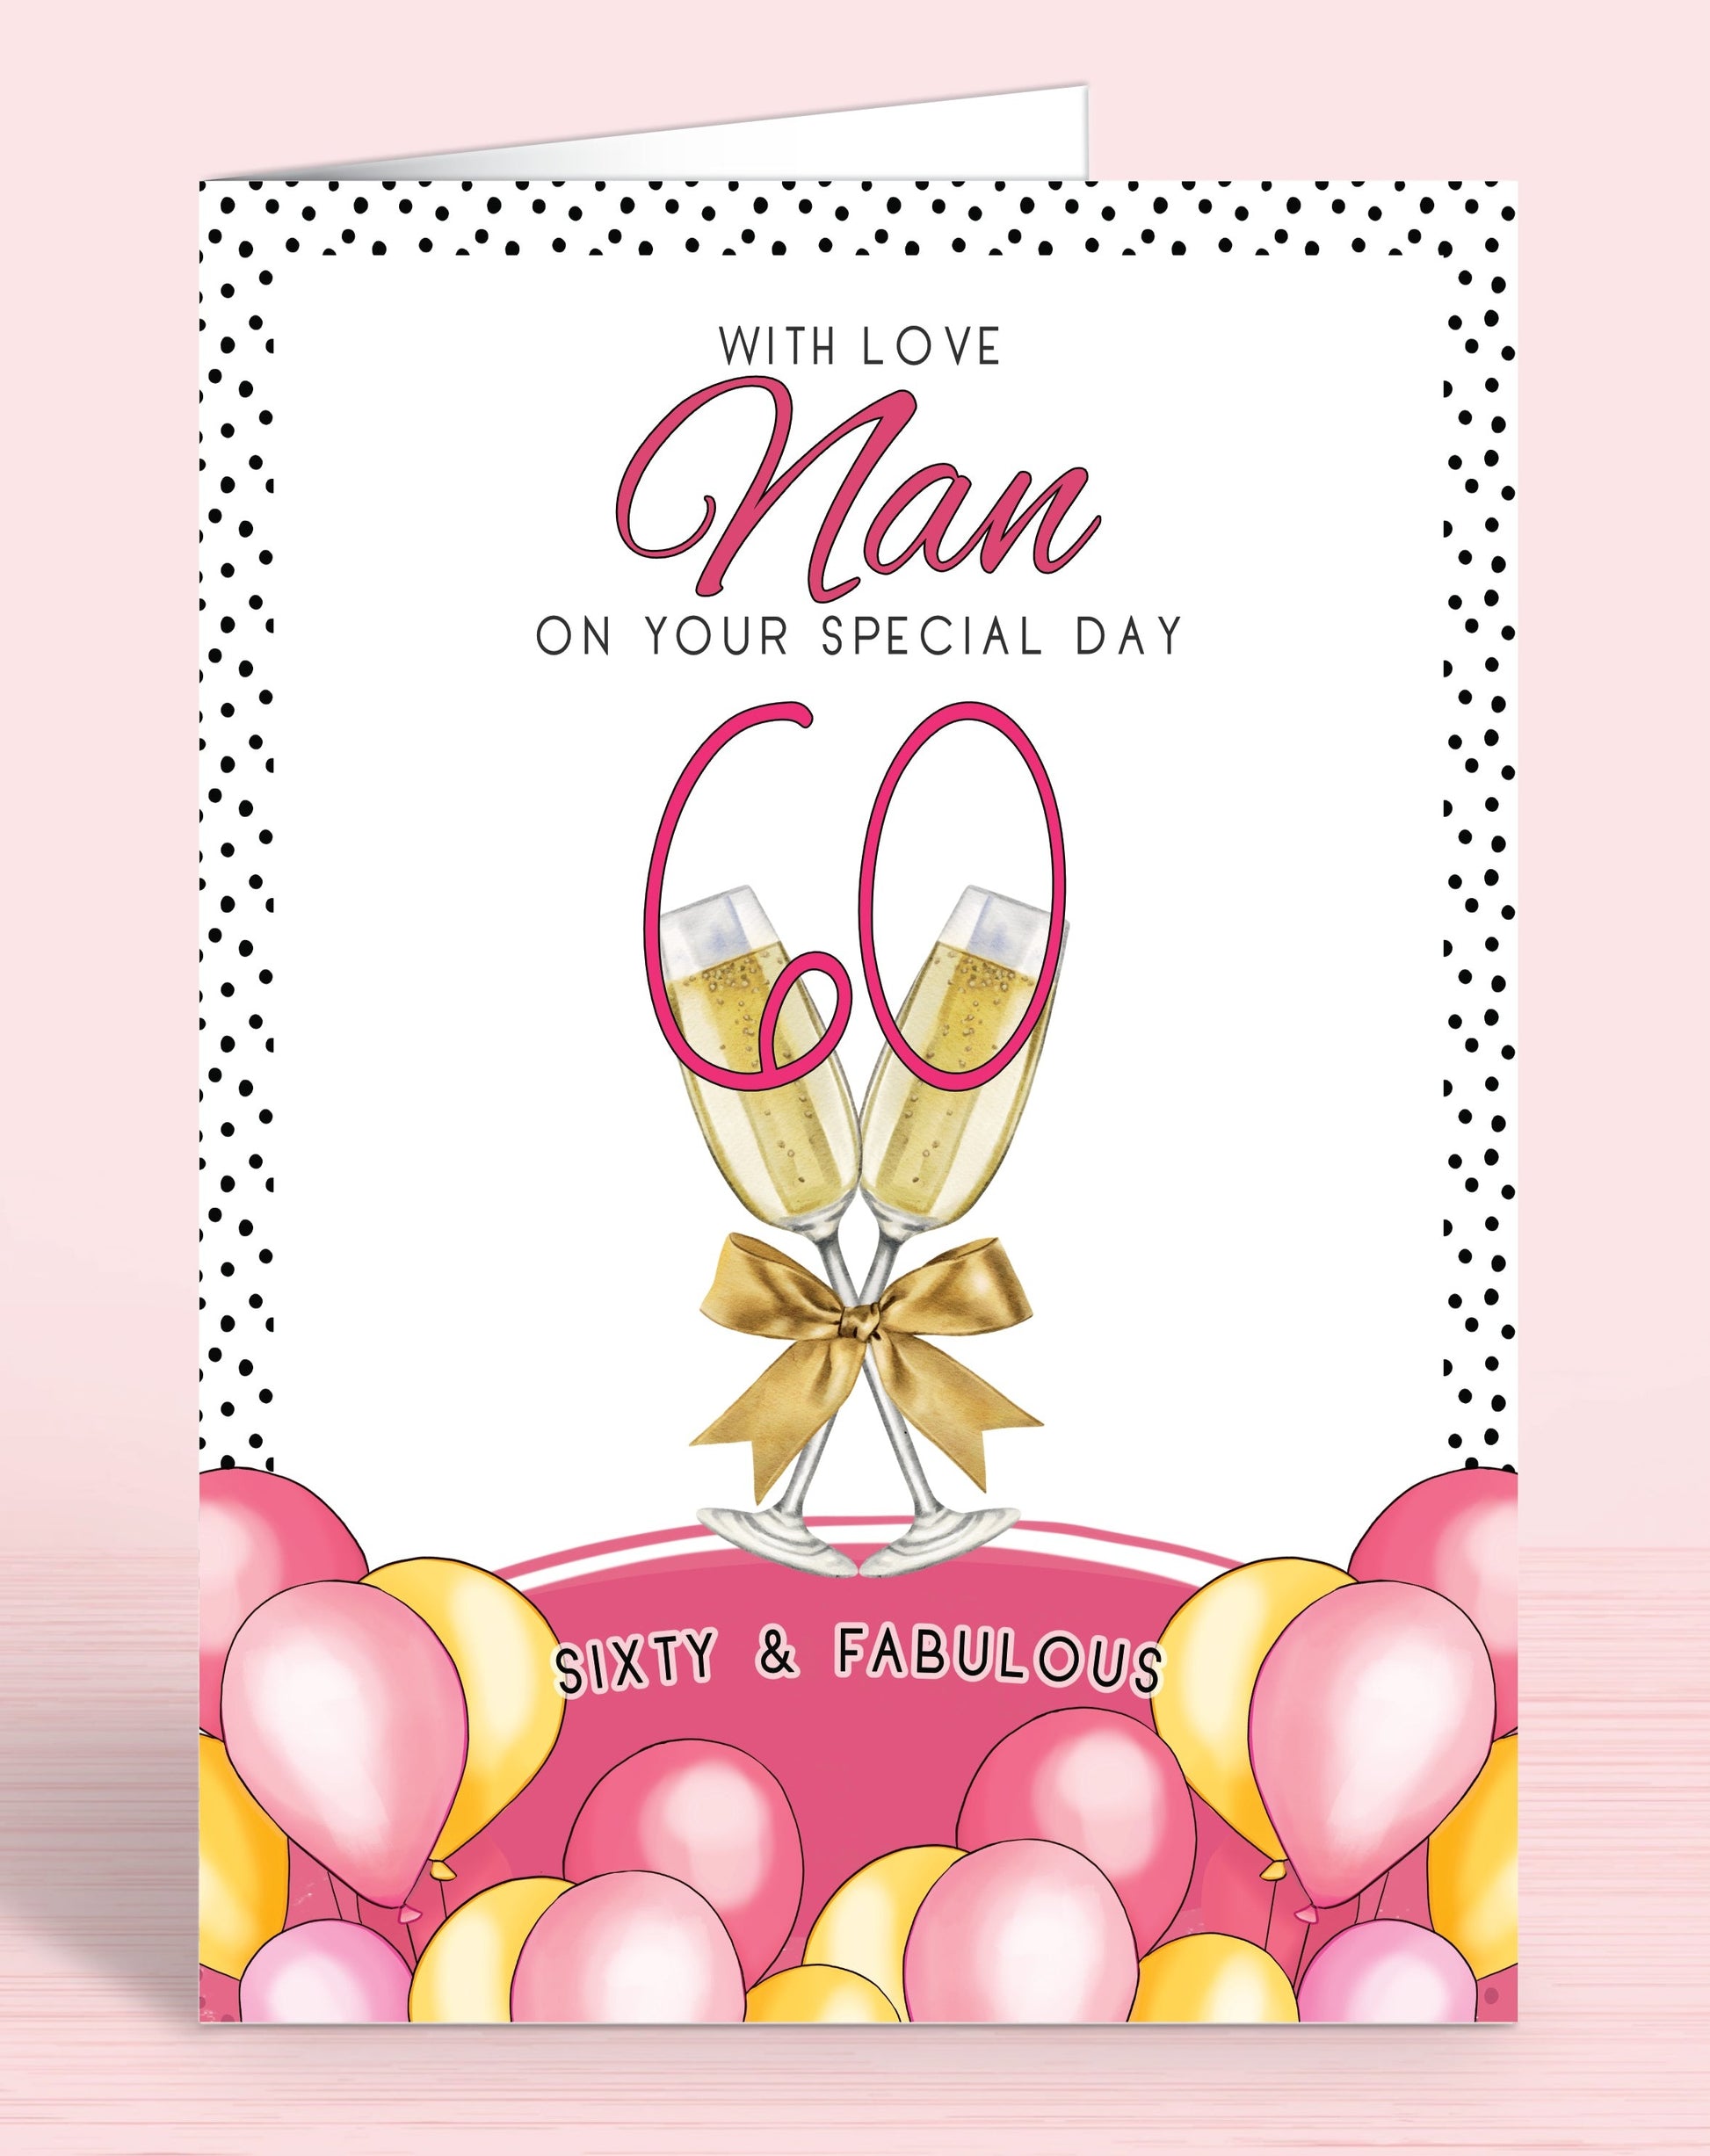 Nan Birthday Card, Pink Polkadot Nan 60th Birthday Card, Pink & Yellow Balloons, Bubbly & faux Gold Bow. With Love Nan on your special day, personalised birthday card for her, Sixty & Fabulous | Oliver Rose Designs